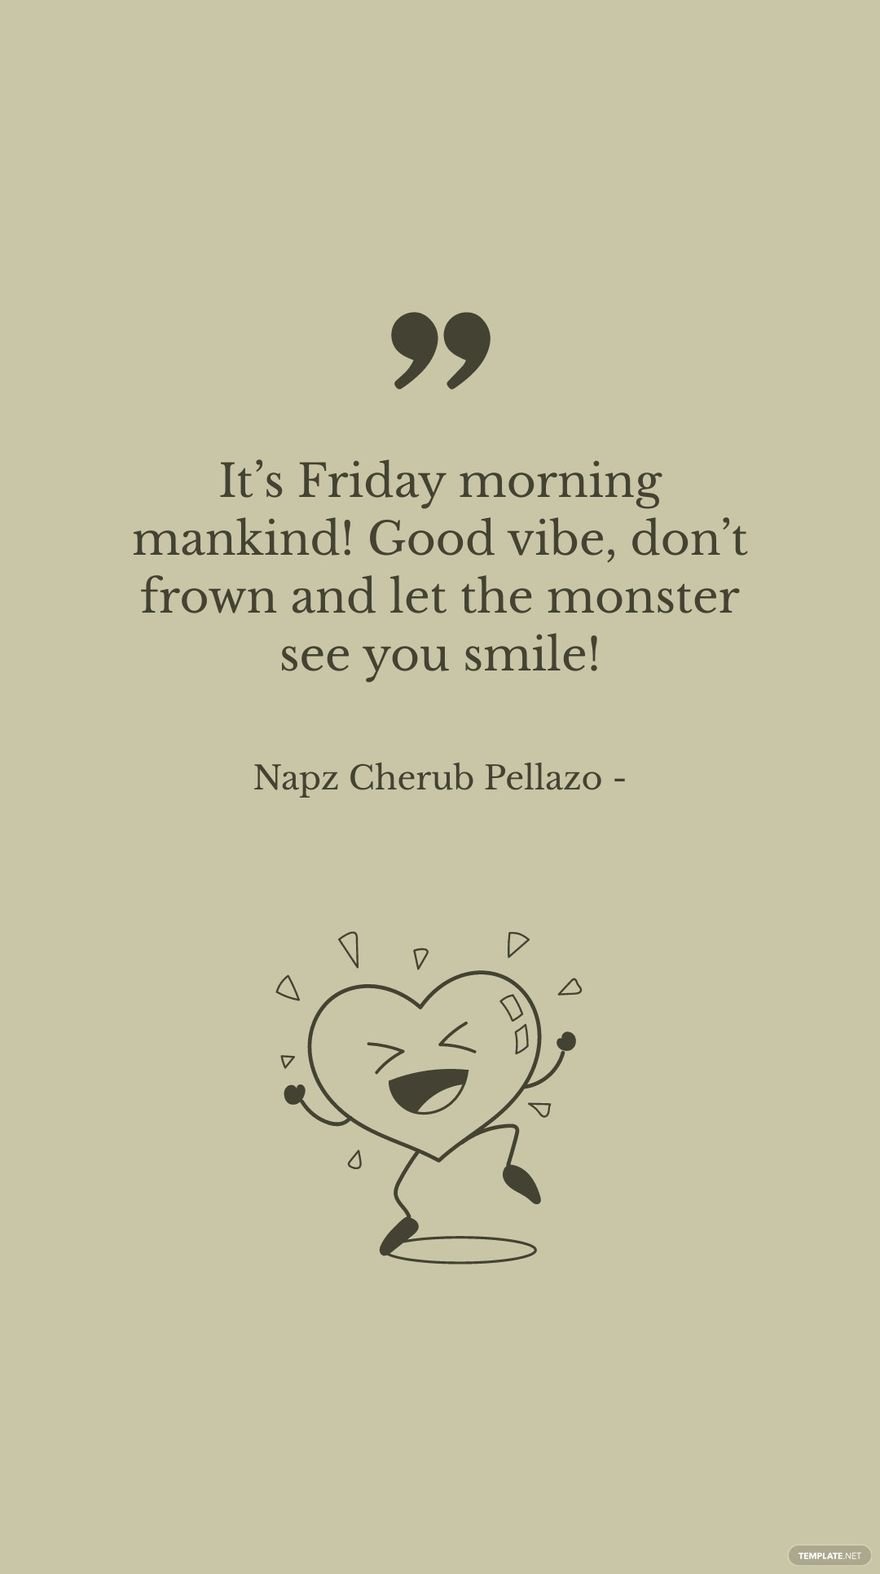 Free Napz Cherub Pellazo - It’s Friday morning mankind! Good vibe, don’t frown and let the monster see you smile! in JPG